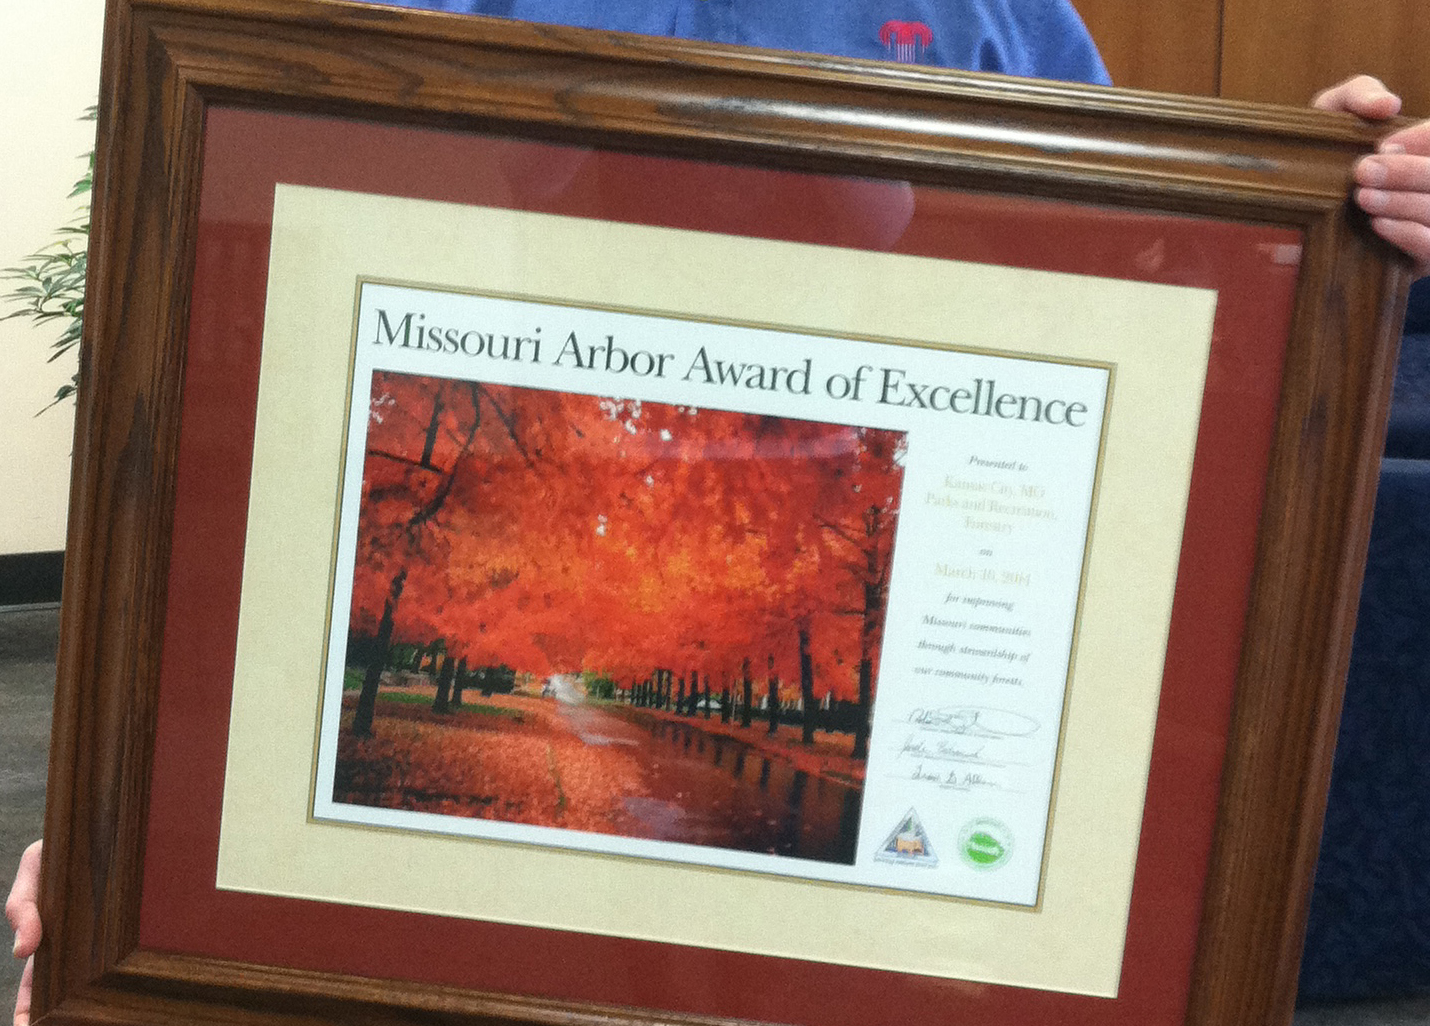 City Receives Missouri Arbor Award of Excellence for Proactive Emerald Ash Borer Management